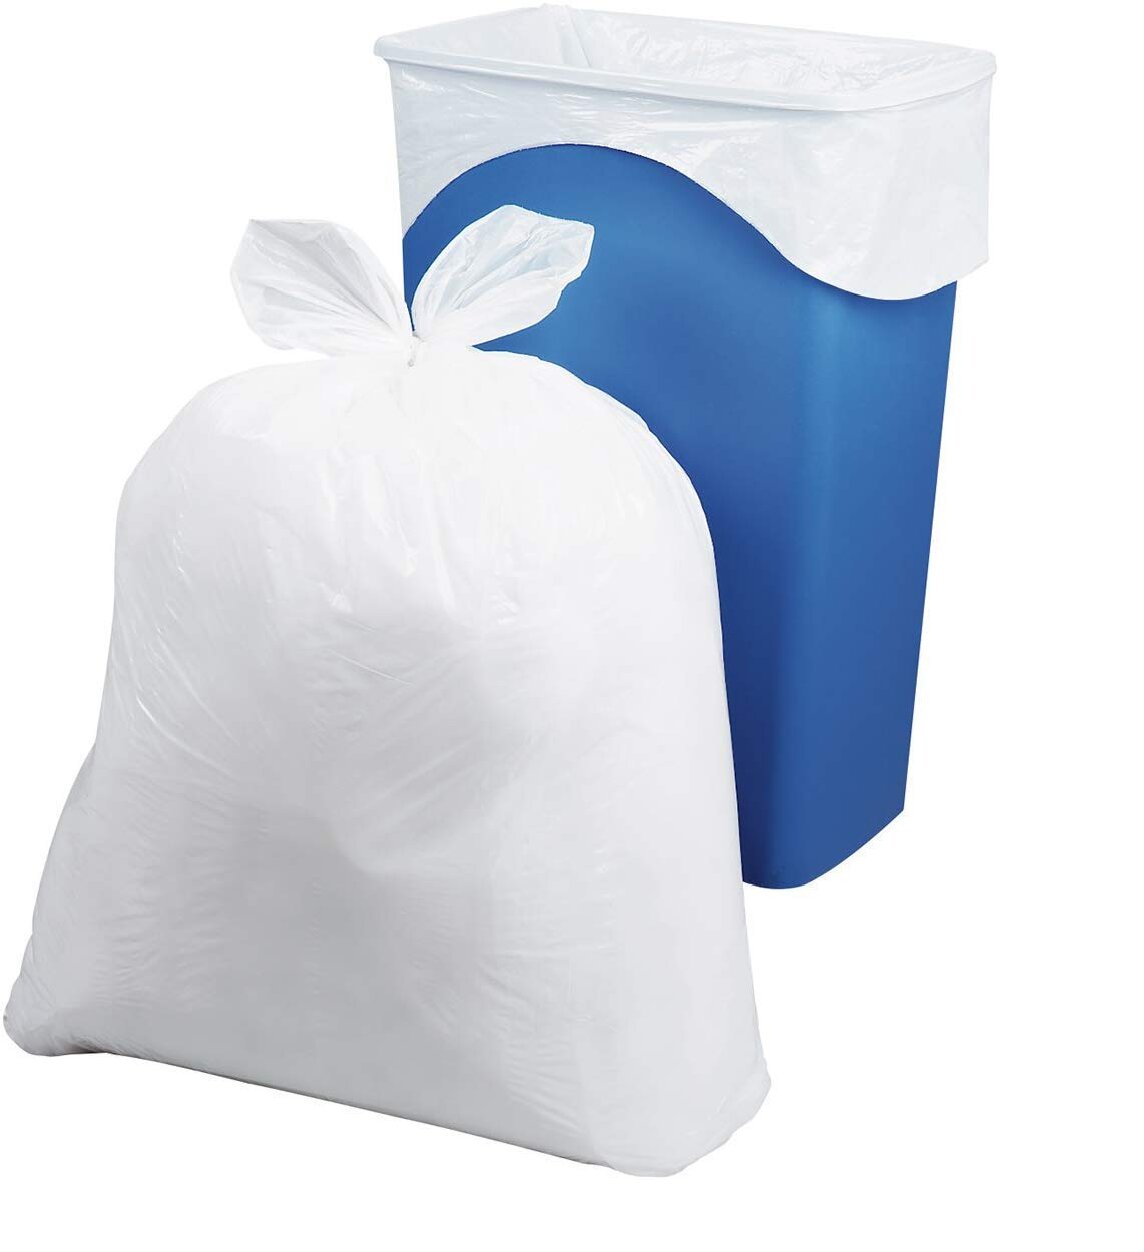 Stock Your Home 2 Gallon Trash Bags (200 Pack)Disposable Plastic